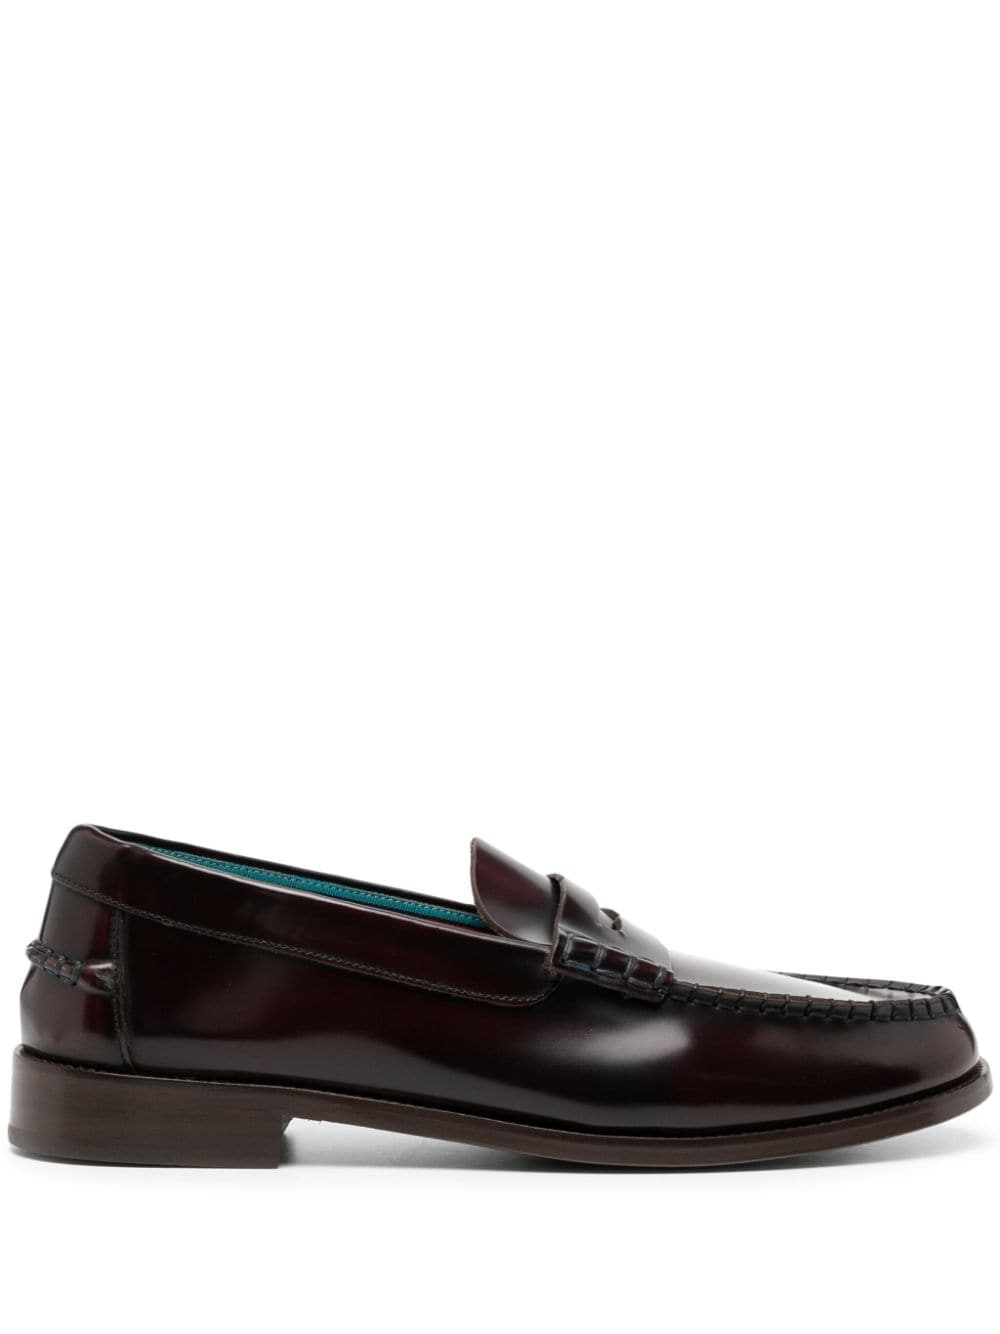 Paul Smith Lido leather loafers - Red von Paul Smith